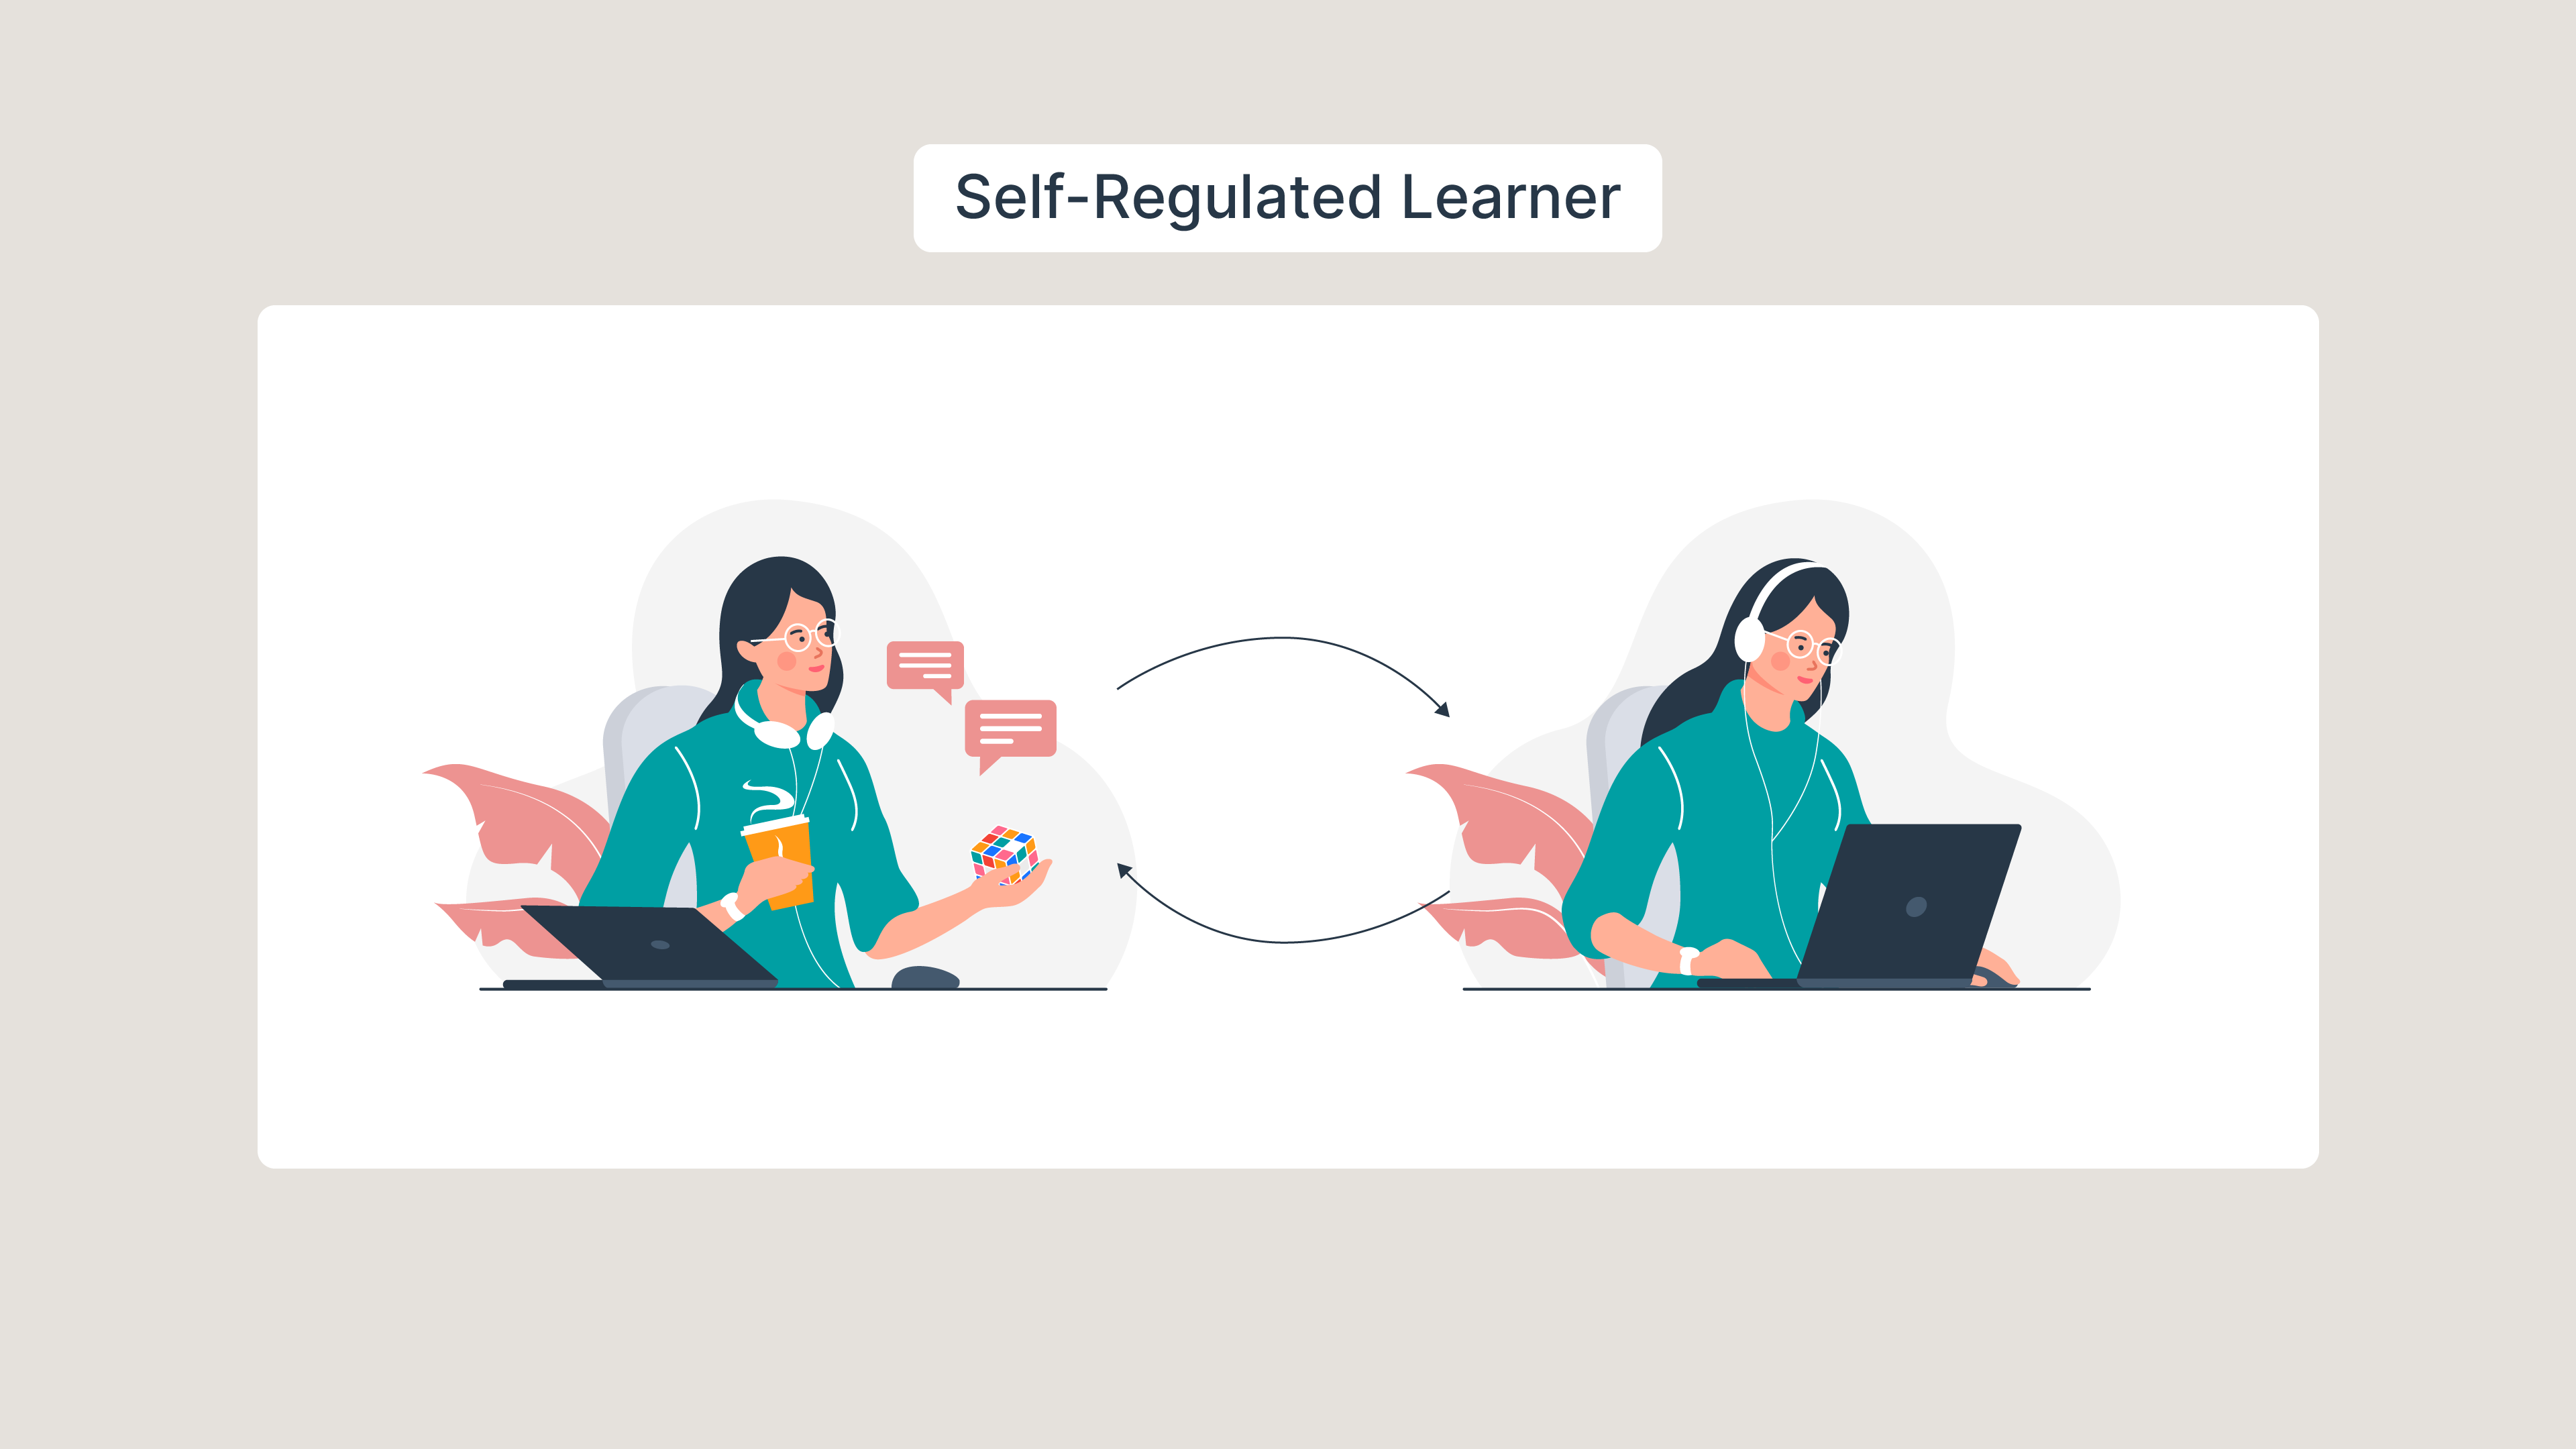 Illustration of the difference between a learner who is not autonomous and a self-regulated learner. On the left, the learner lacks focus. On the right, the learner is fully focussed.